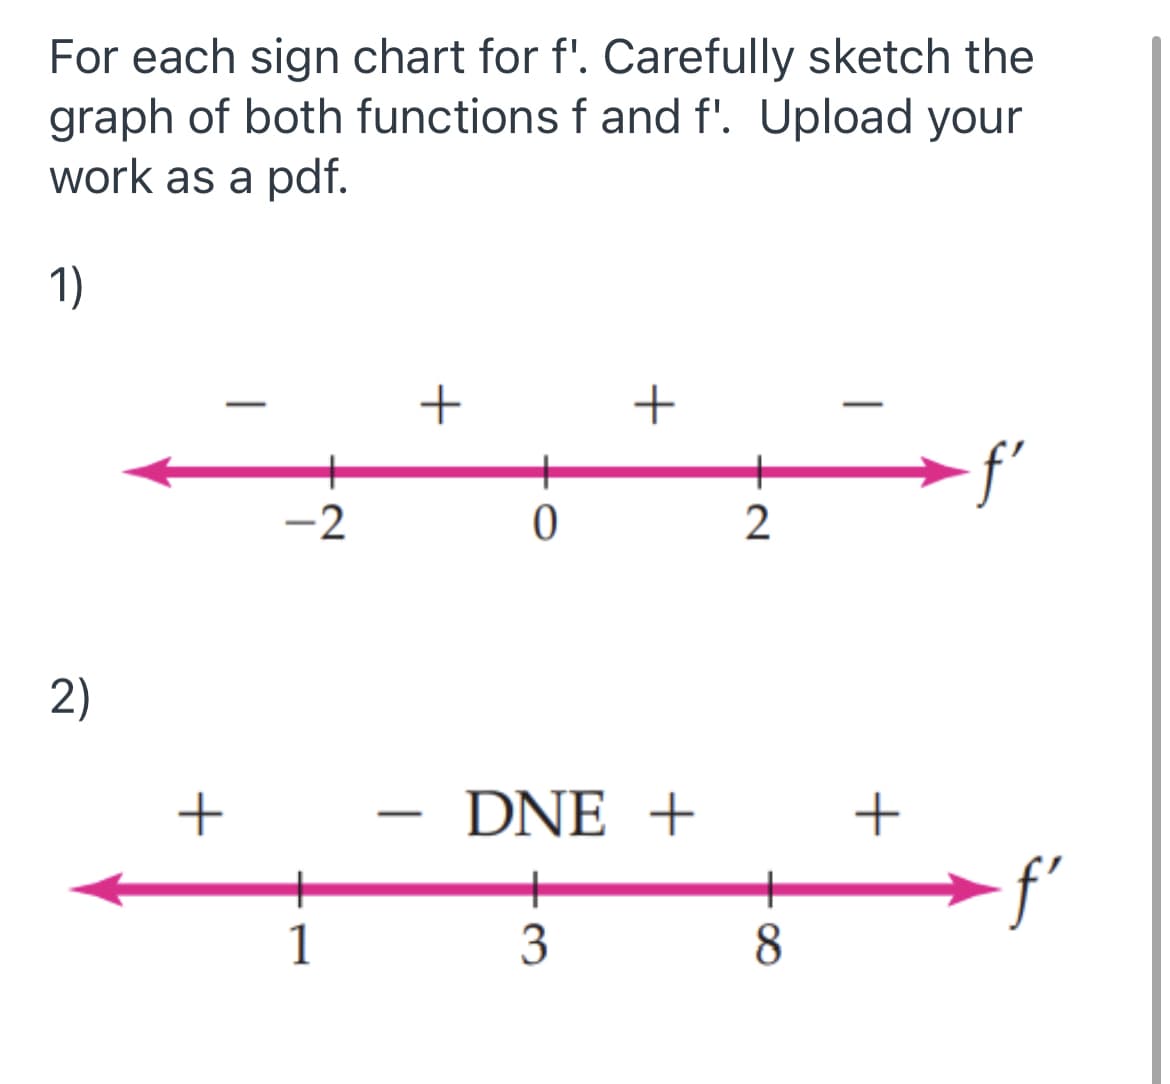 For each sign chart for f'. Carefully sketch the
graph of both functions f and f'. Upload your
work as a pdf.
1)
+
+
-2
2
2)
DNE +
-
1
8.
+
3.
+
